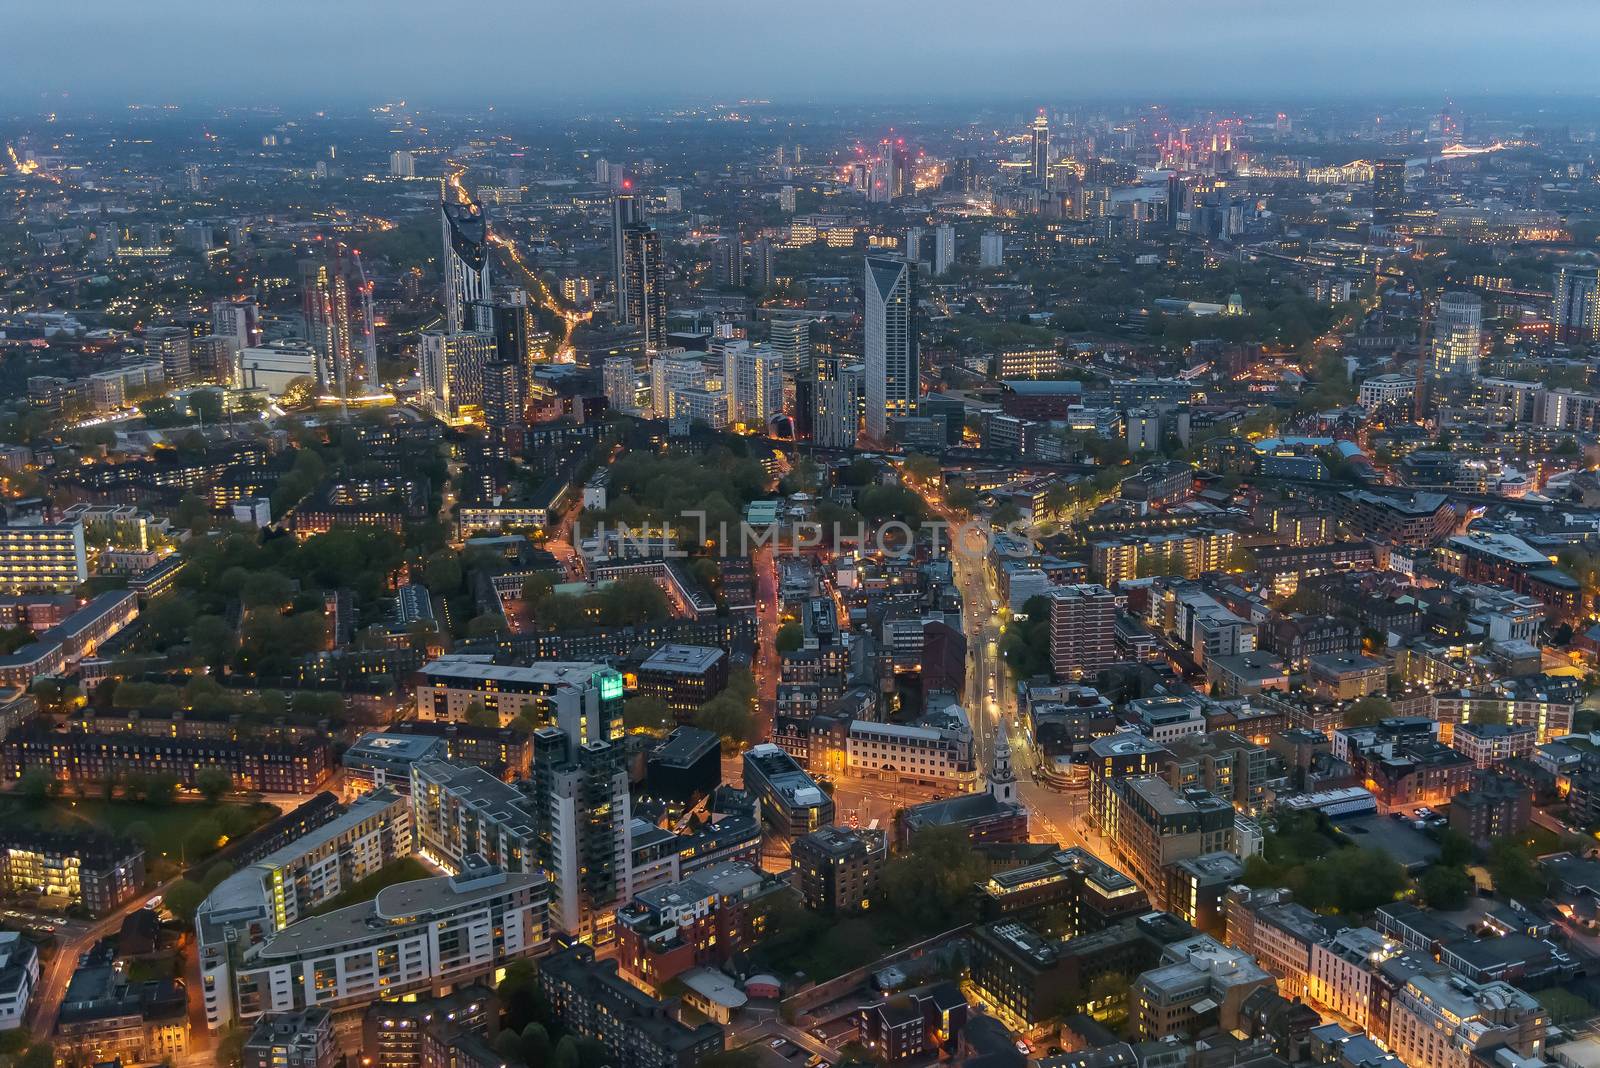 Aerial view of Southwark district in London on a cloudy day at dusk